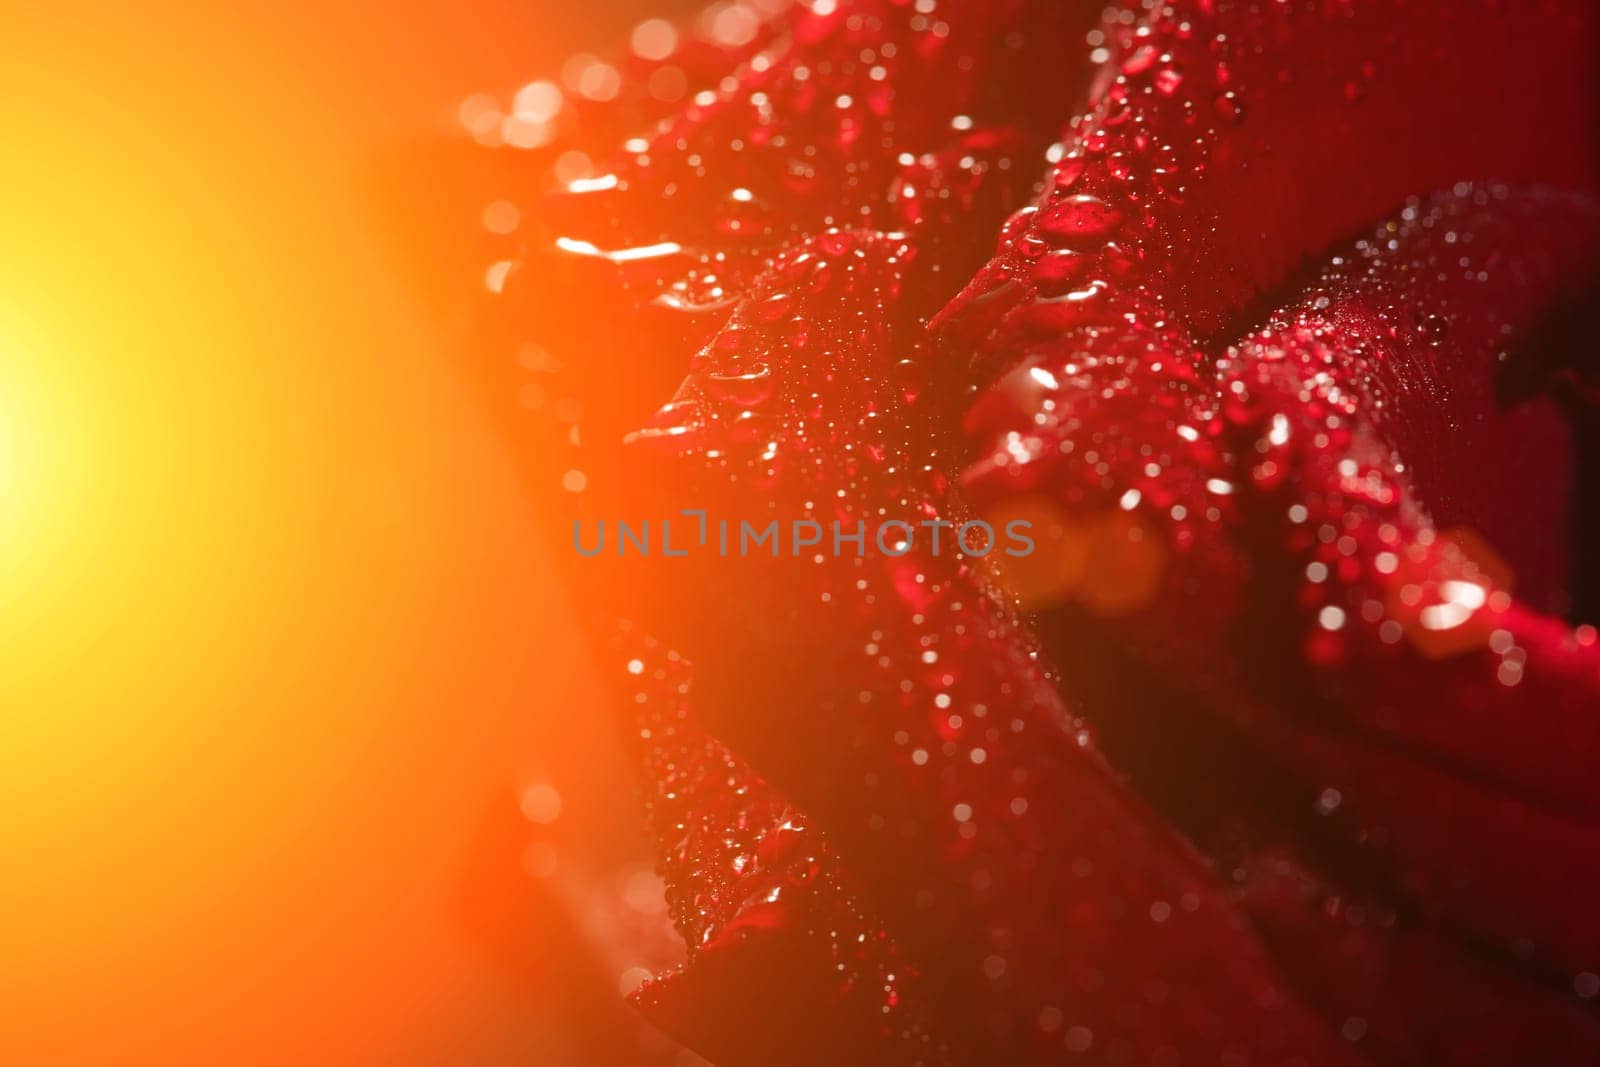 dark red rose with dew drops very close-up.